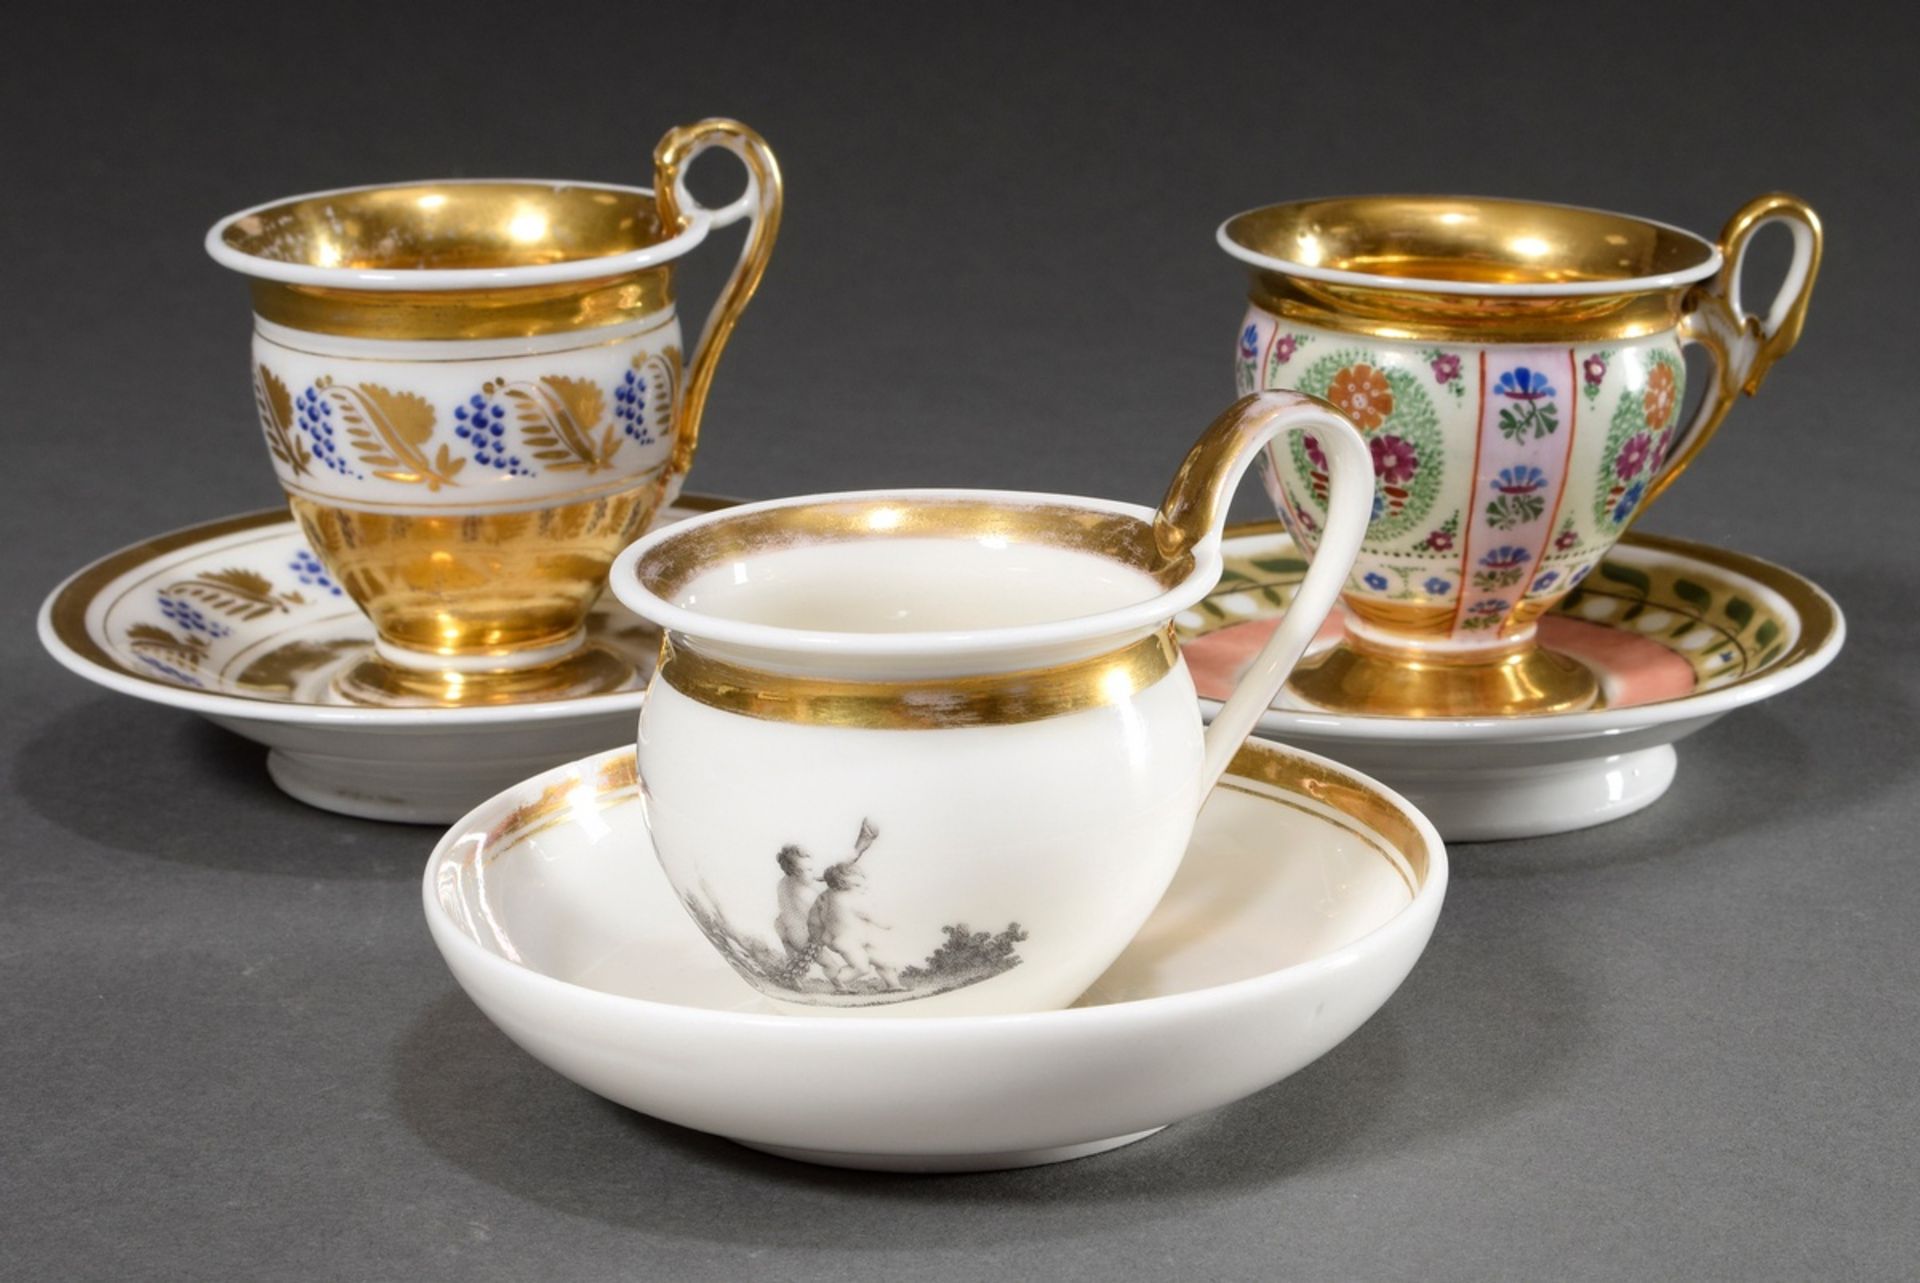 3 Empire porcelain cups/saucers with floral painting and gold decoration, 1x with overprint decorat - Image 2 of 3